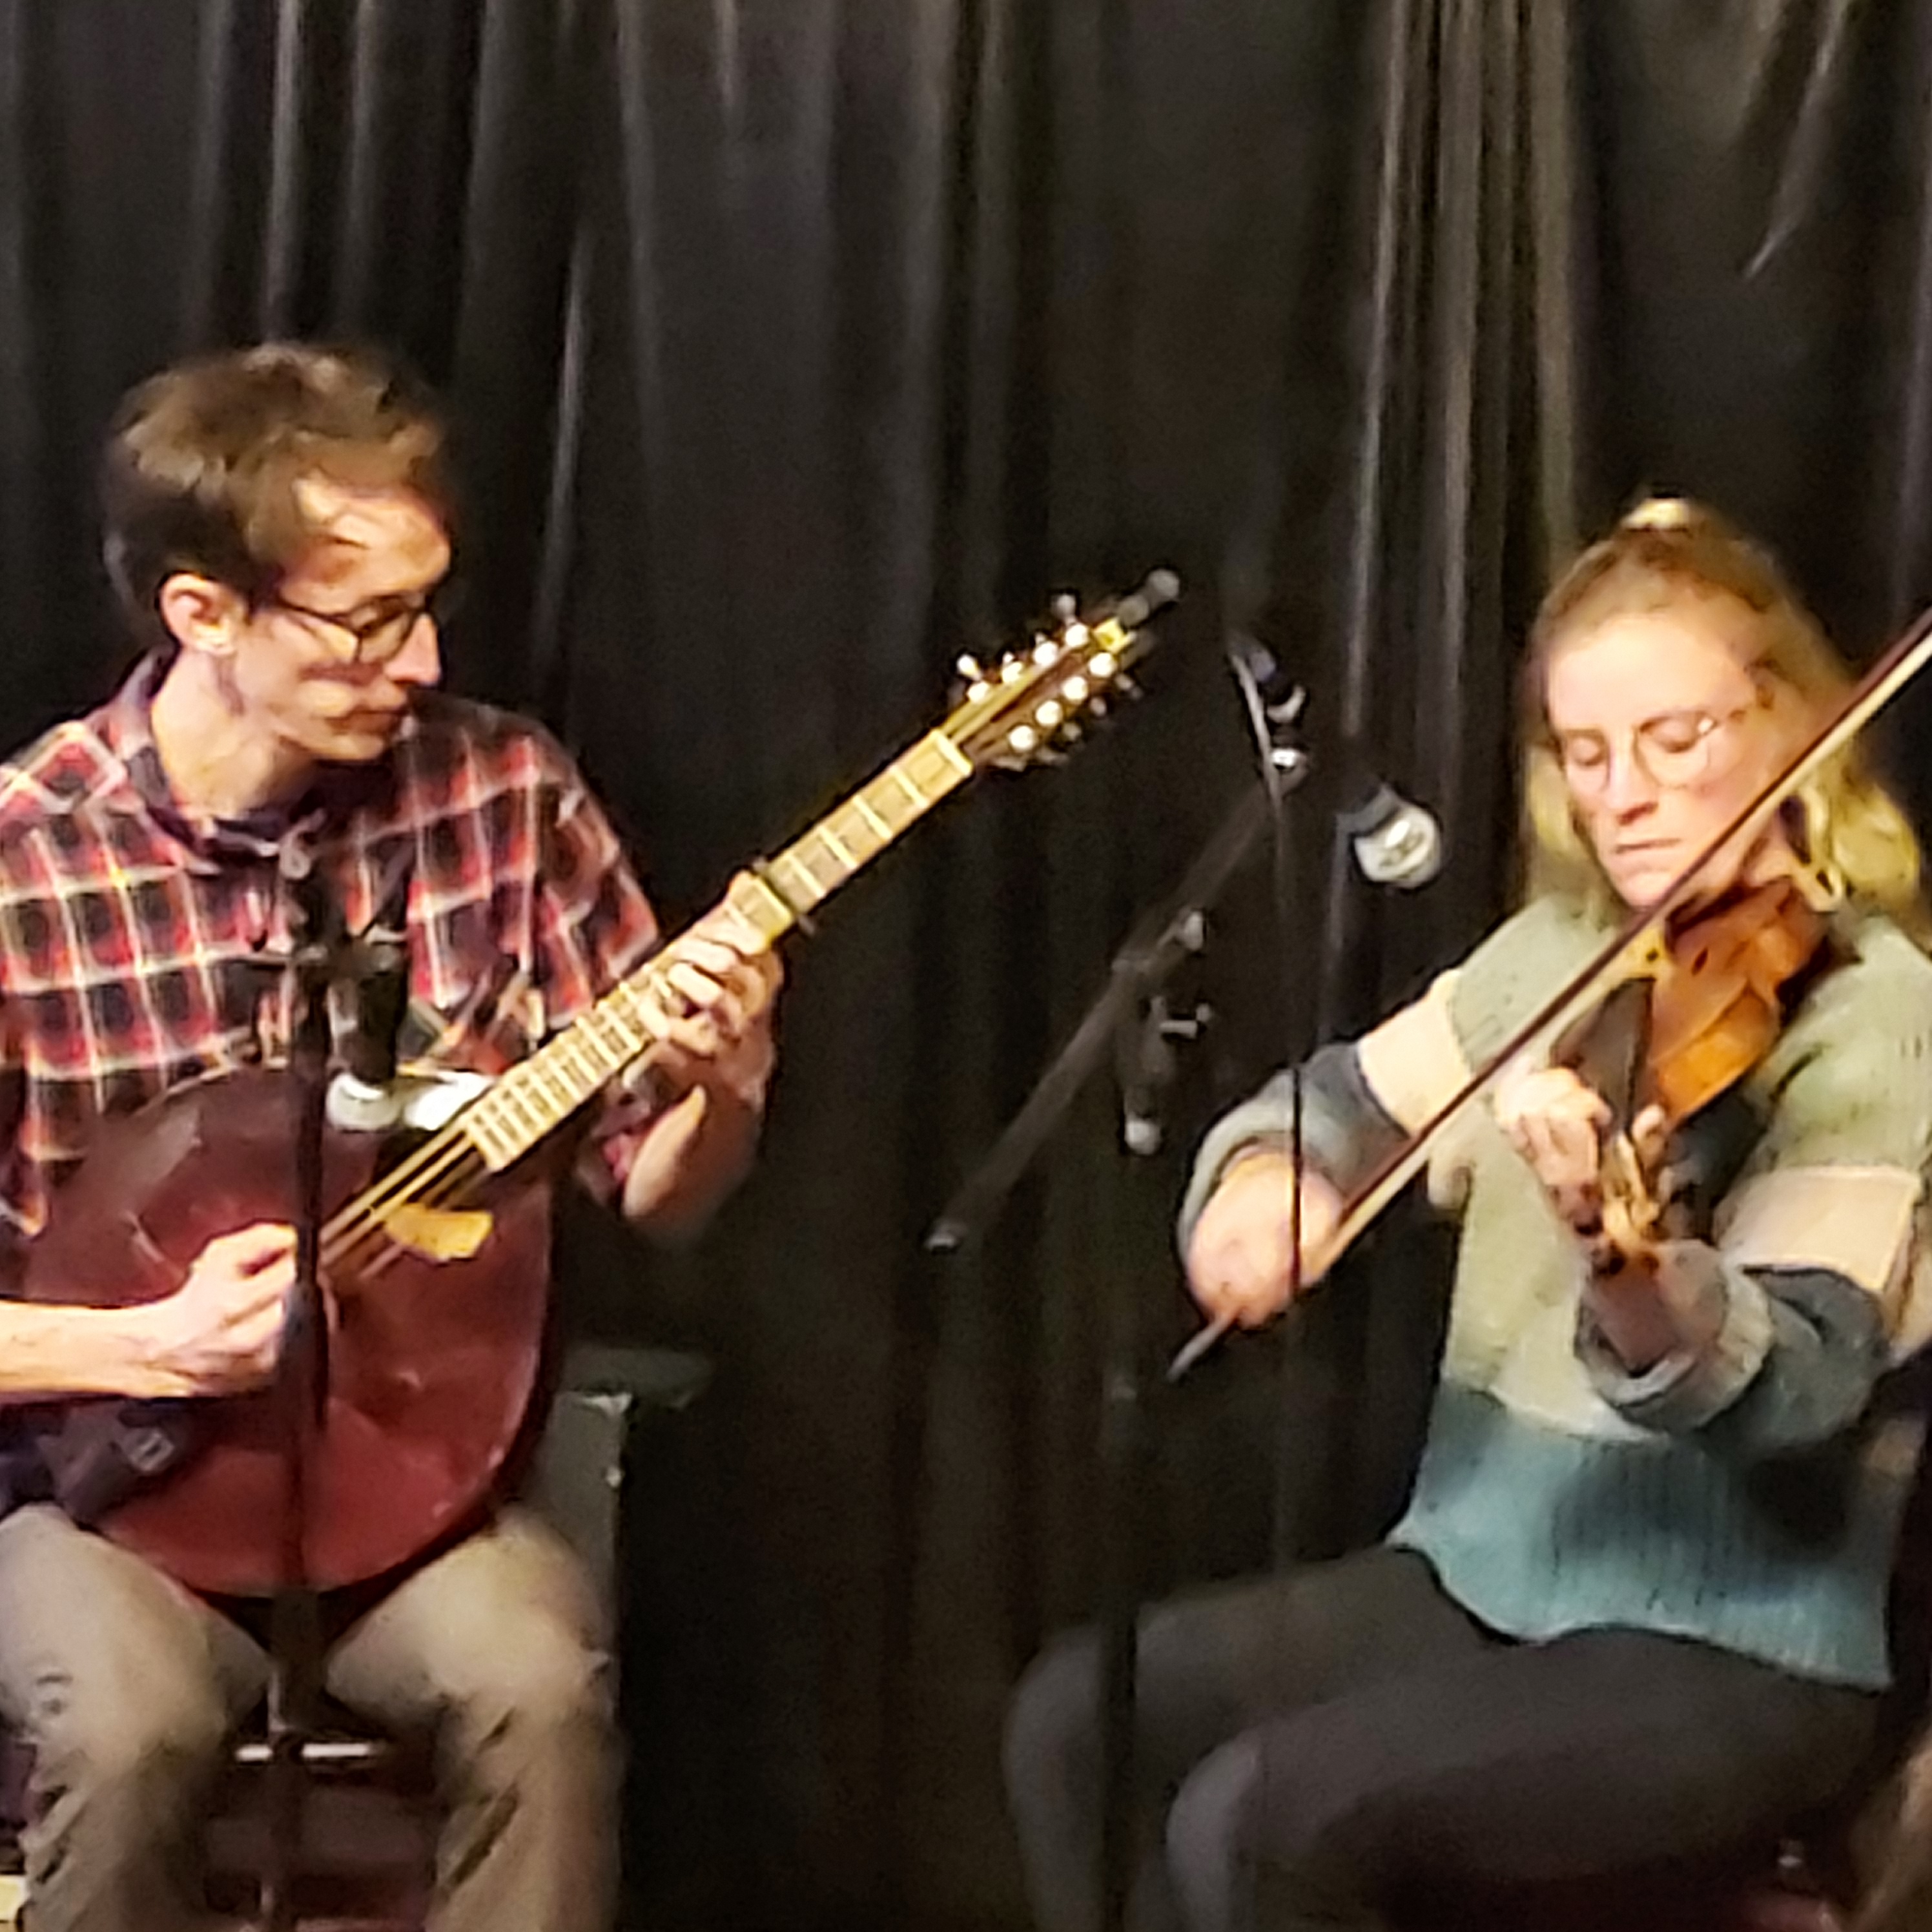 Bangers and Blunders (Shannon Muenchow & Graeme Danforth) at Celtic Night at the Merc